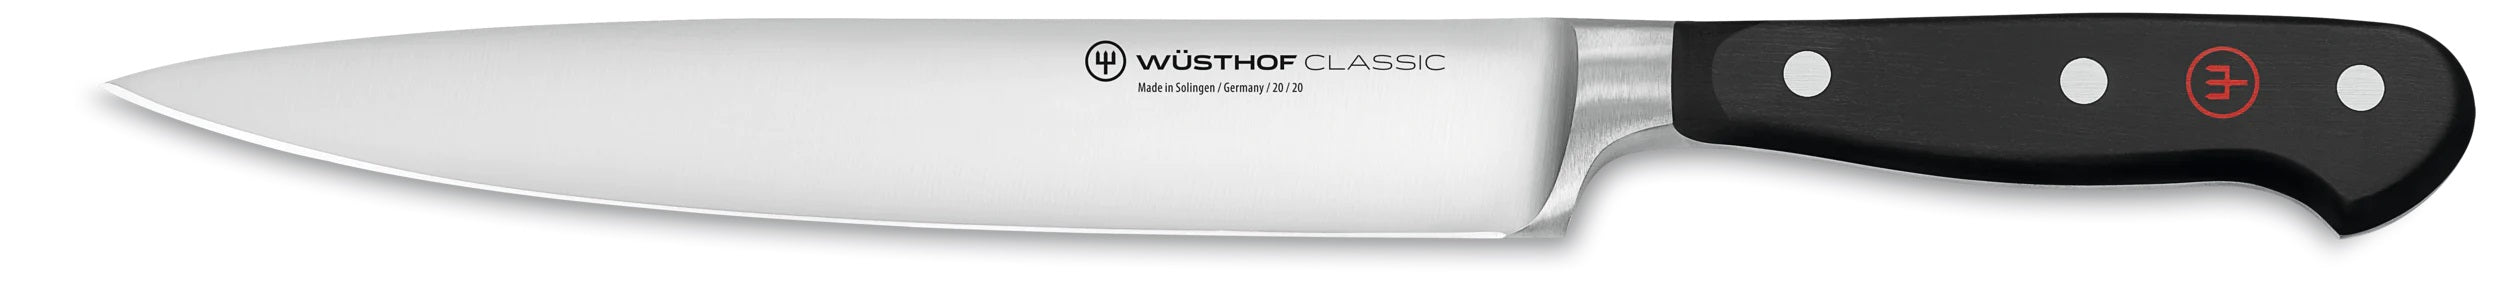 Wusthof Classic 8" Carving Knife 1040100720